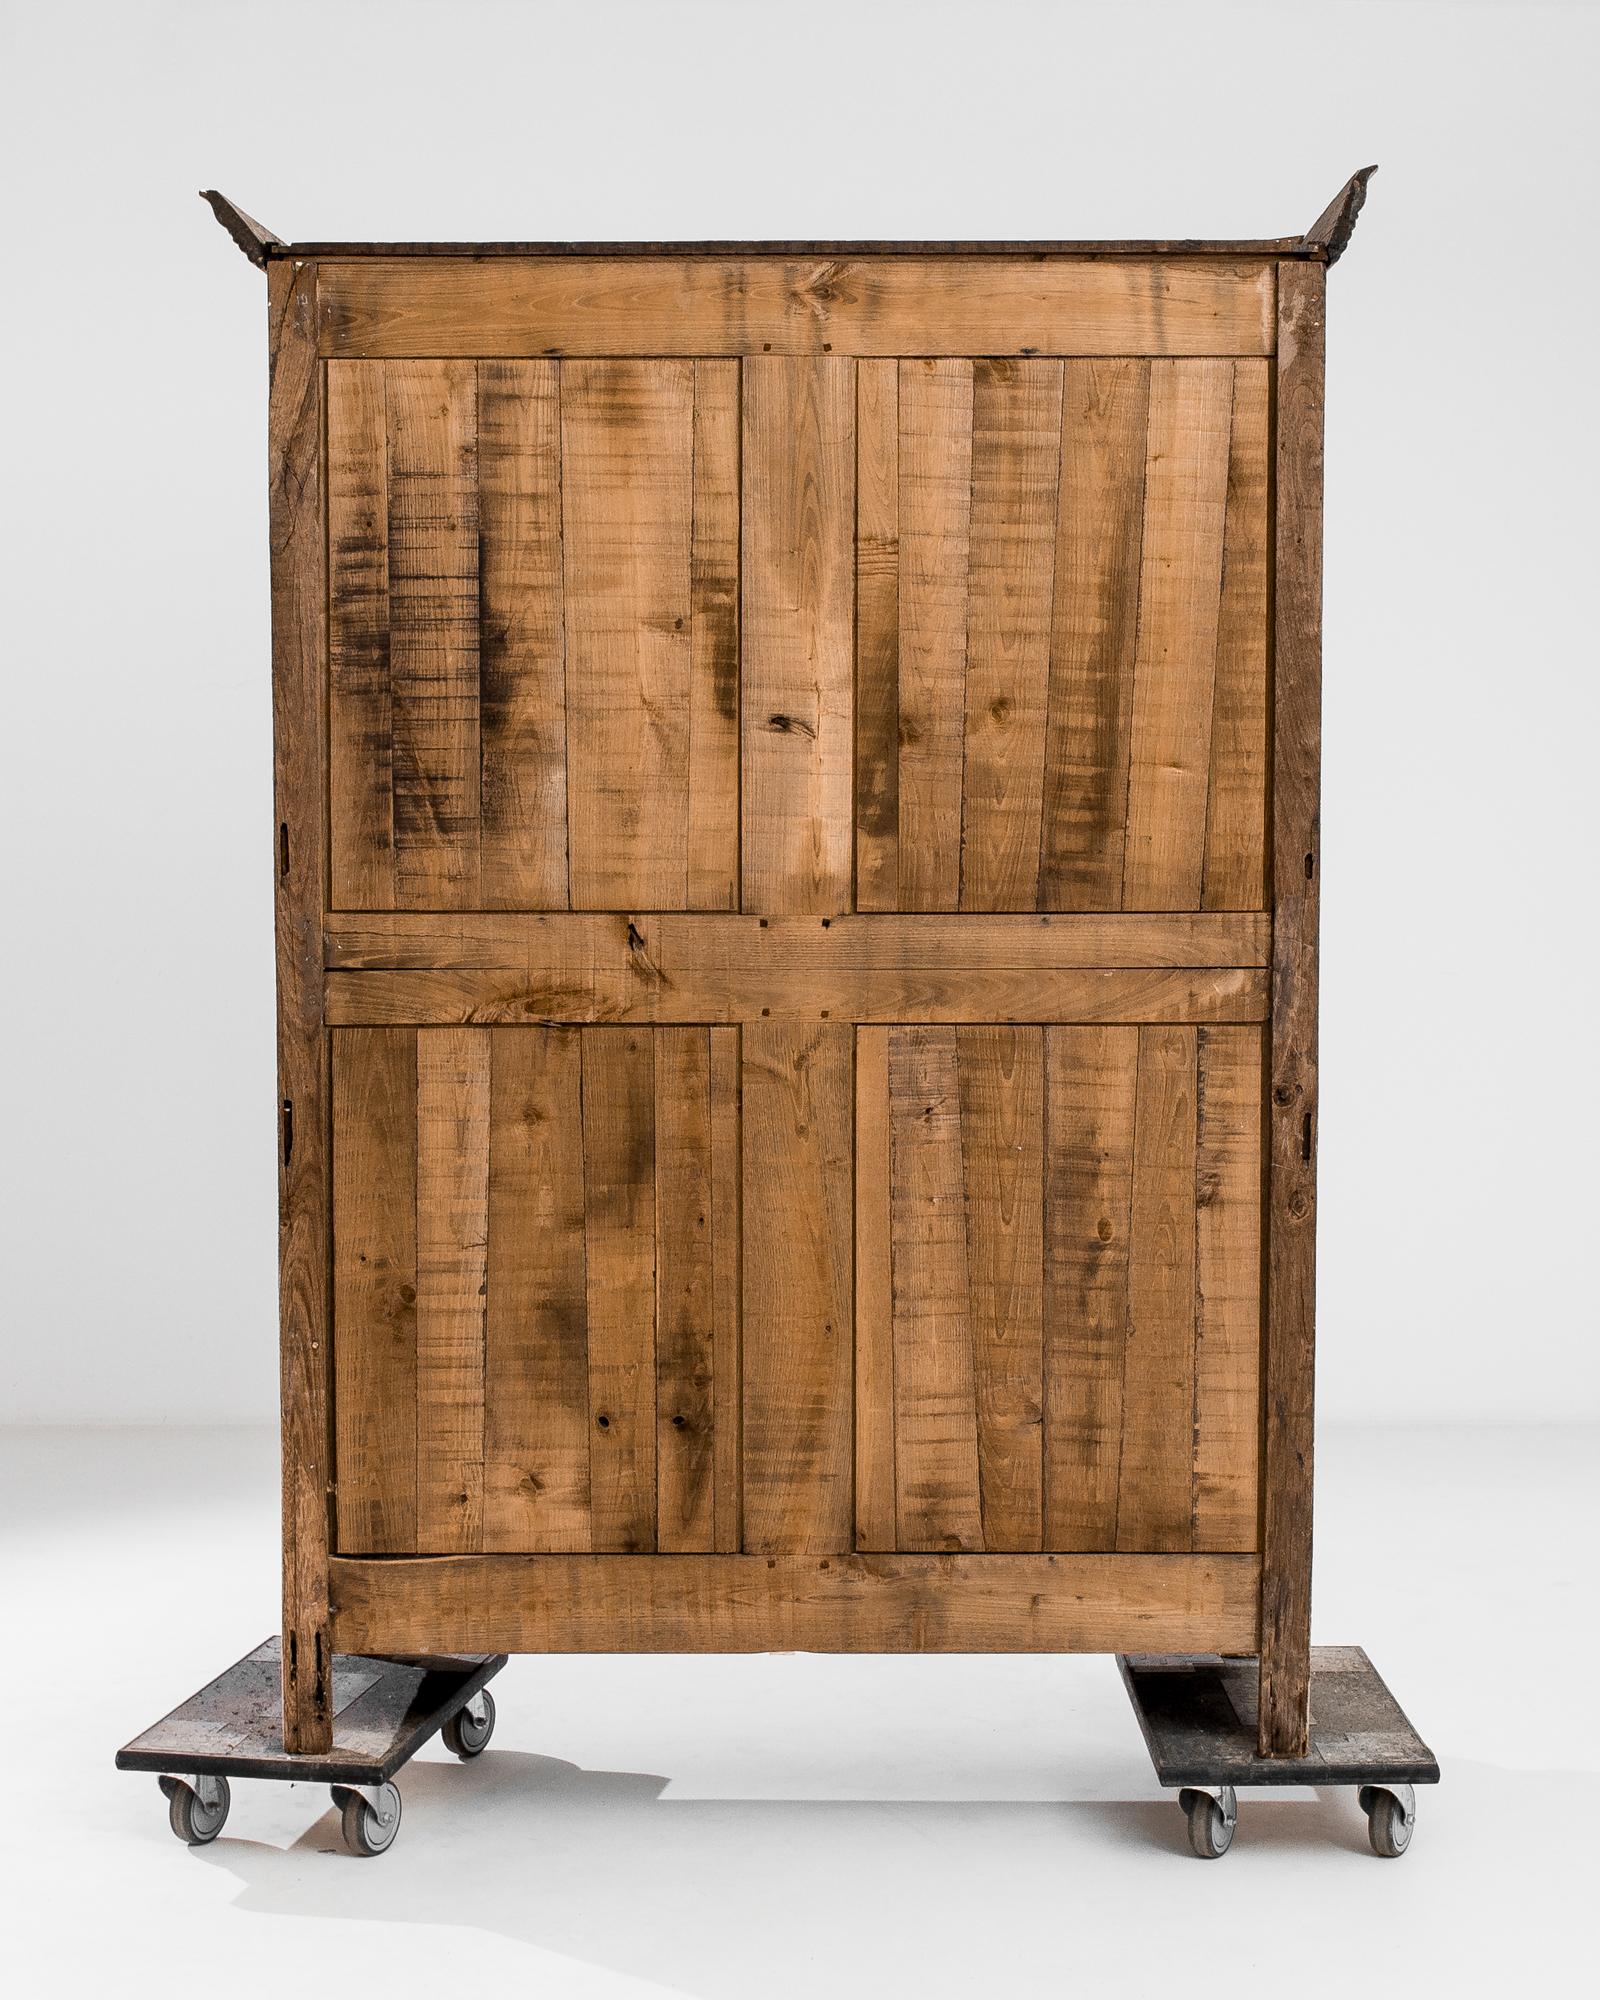 This antique wooden armoire was produced in France, circa 1820. A molded cornice rests firmly on top of the upright case, while simple elegant carvings on the raised doors punctuate the sobriety of the silhouette. The spiral and curves end in a